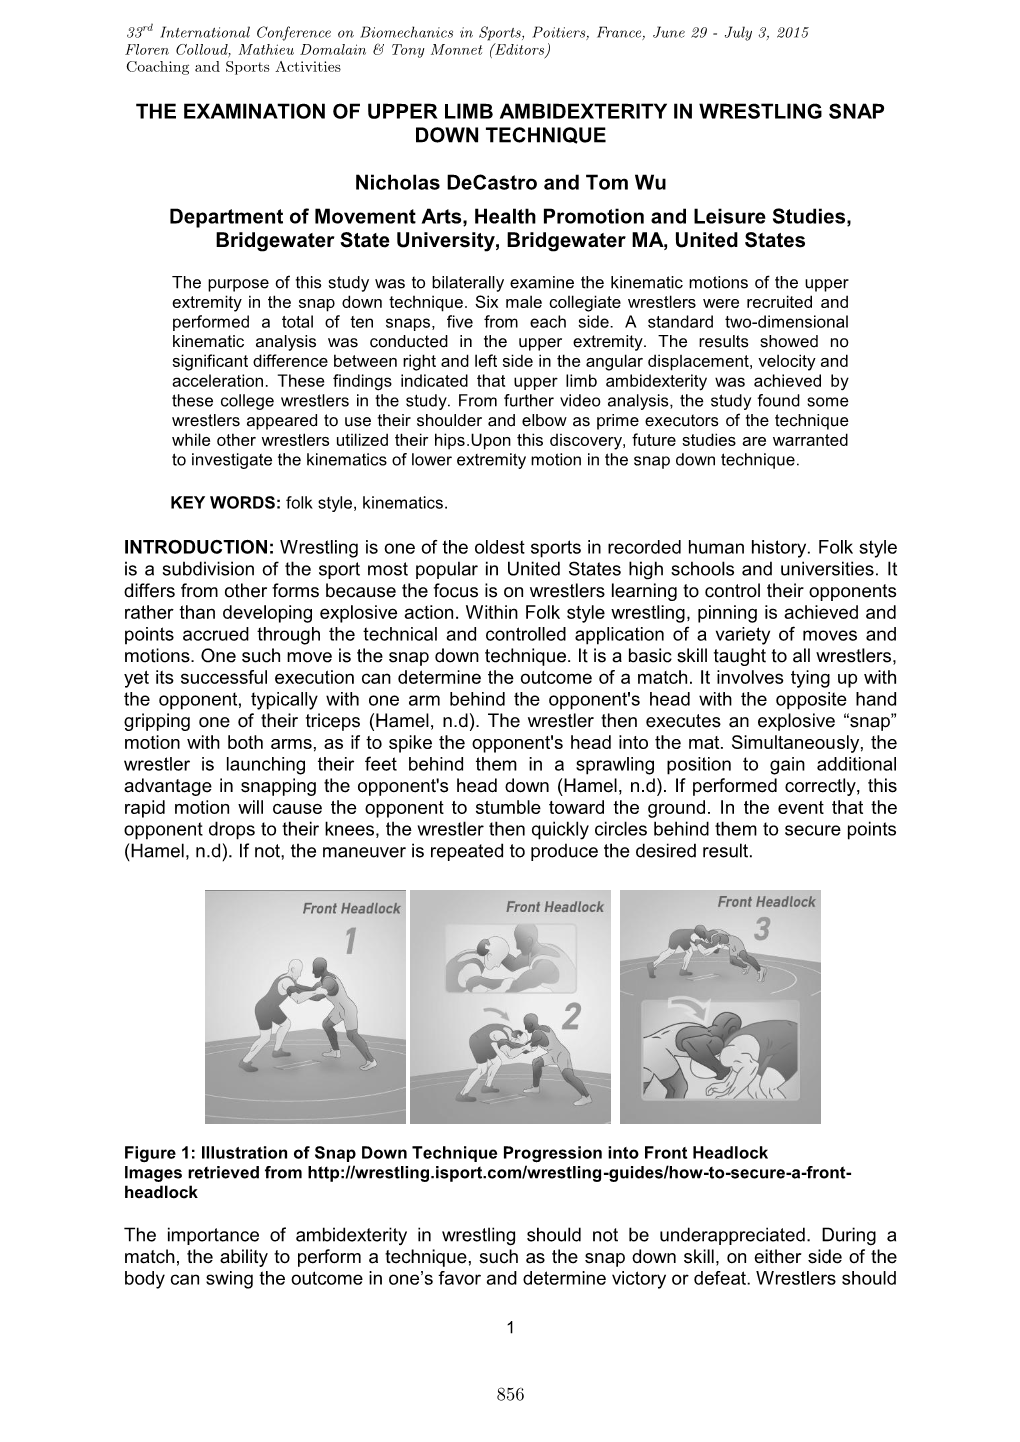 The Examination of Upper Limb Ambidexterity in Wrestling Snap Down Technique